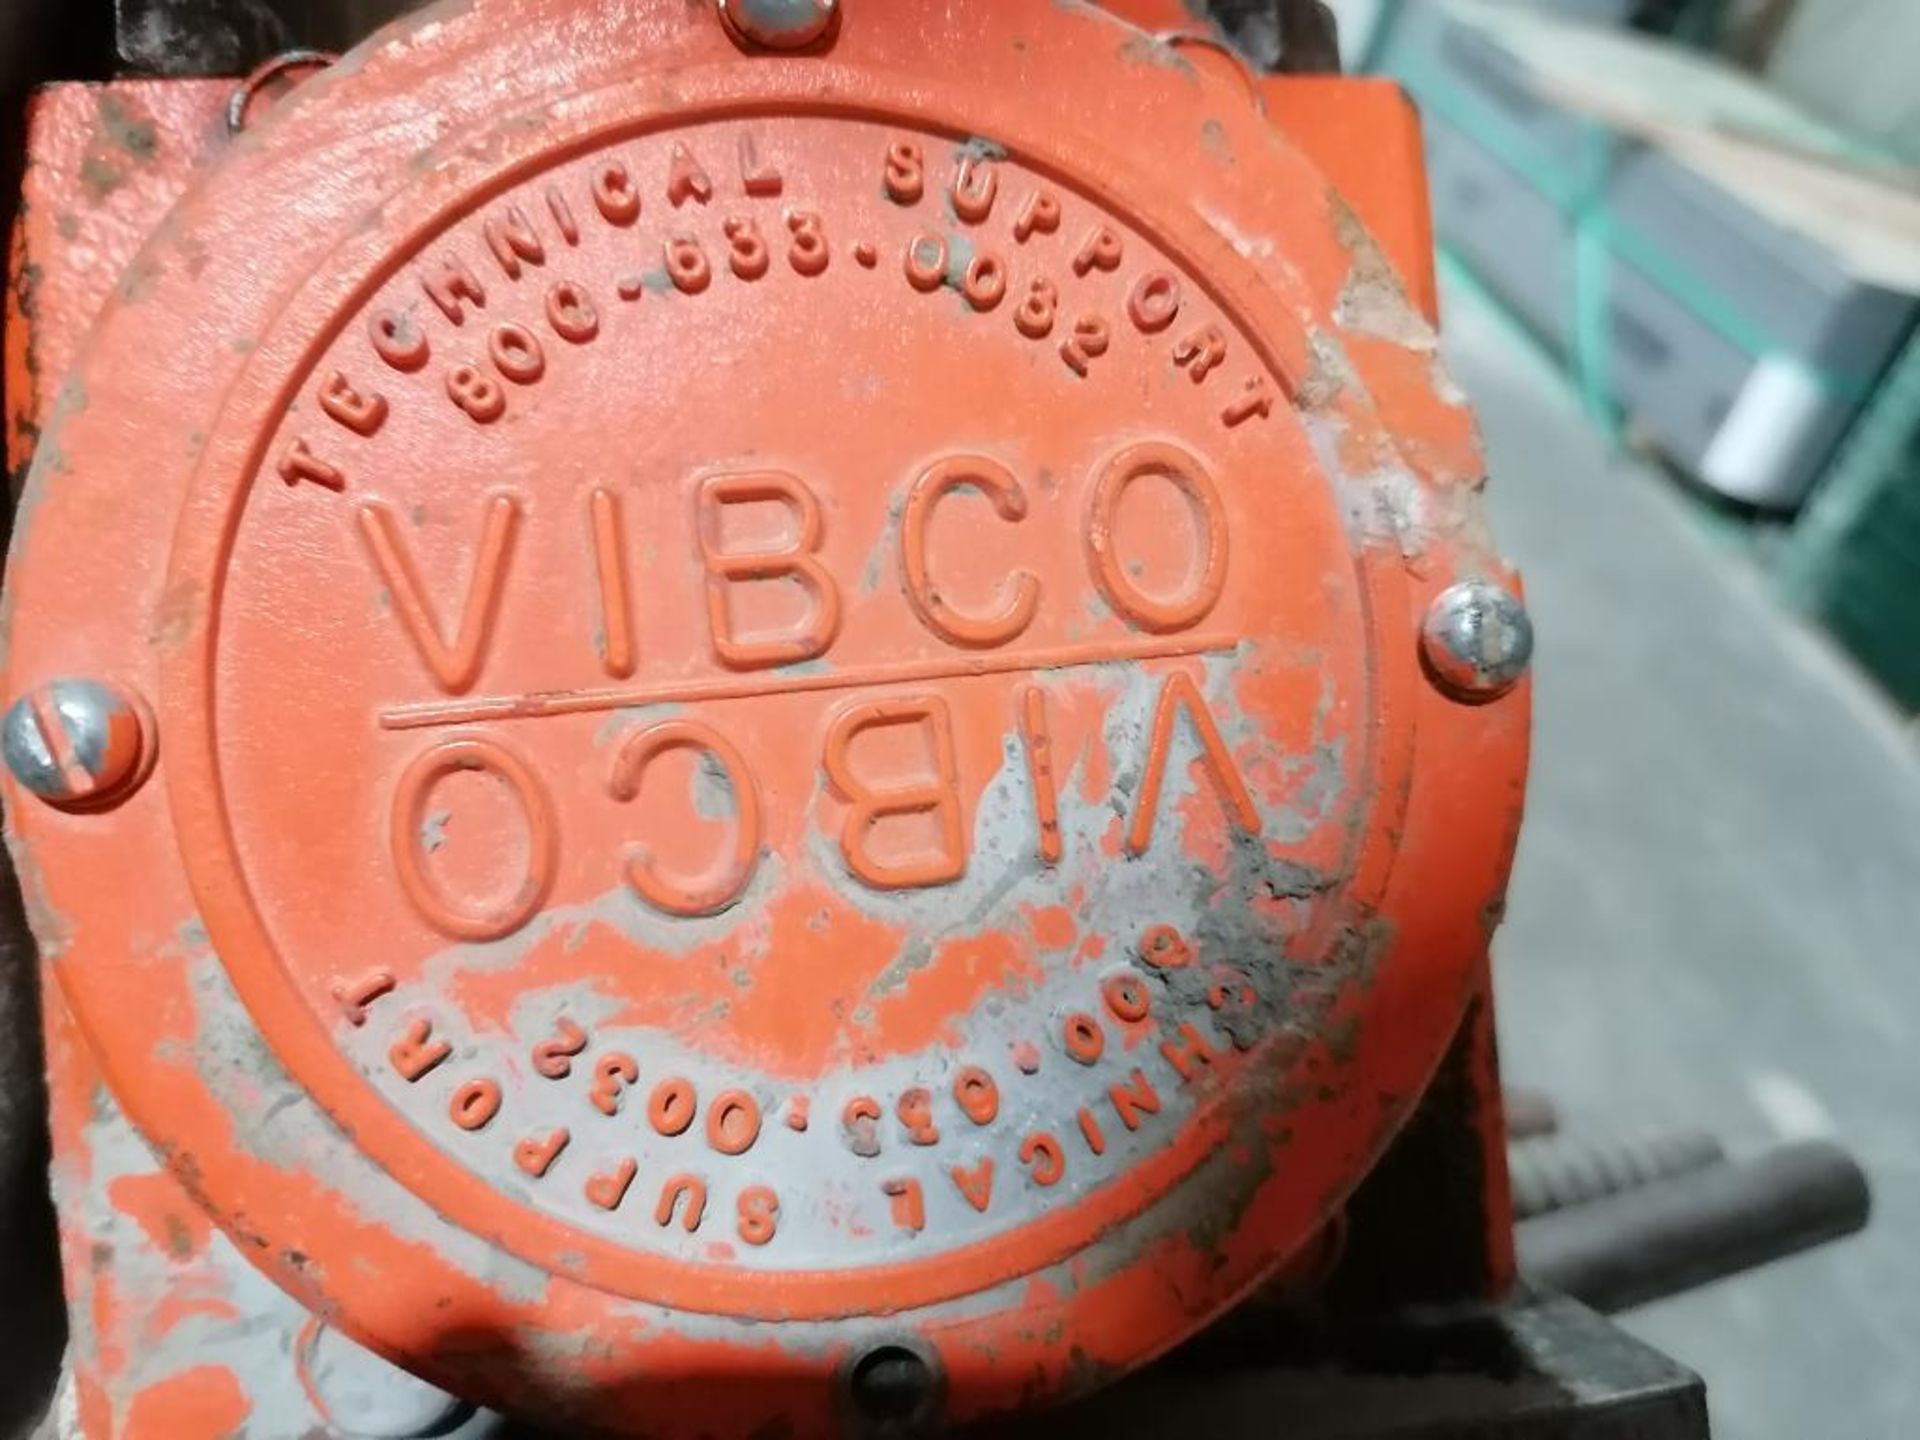 (1) VIBCO US-1600 High Frequency Electric Vibrator, Serial #276747. Located in Council Bluffs, IA. - Image 8 of 8